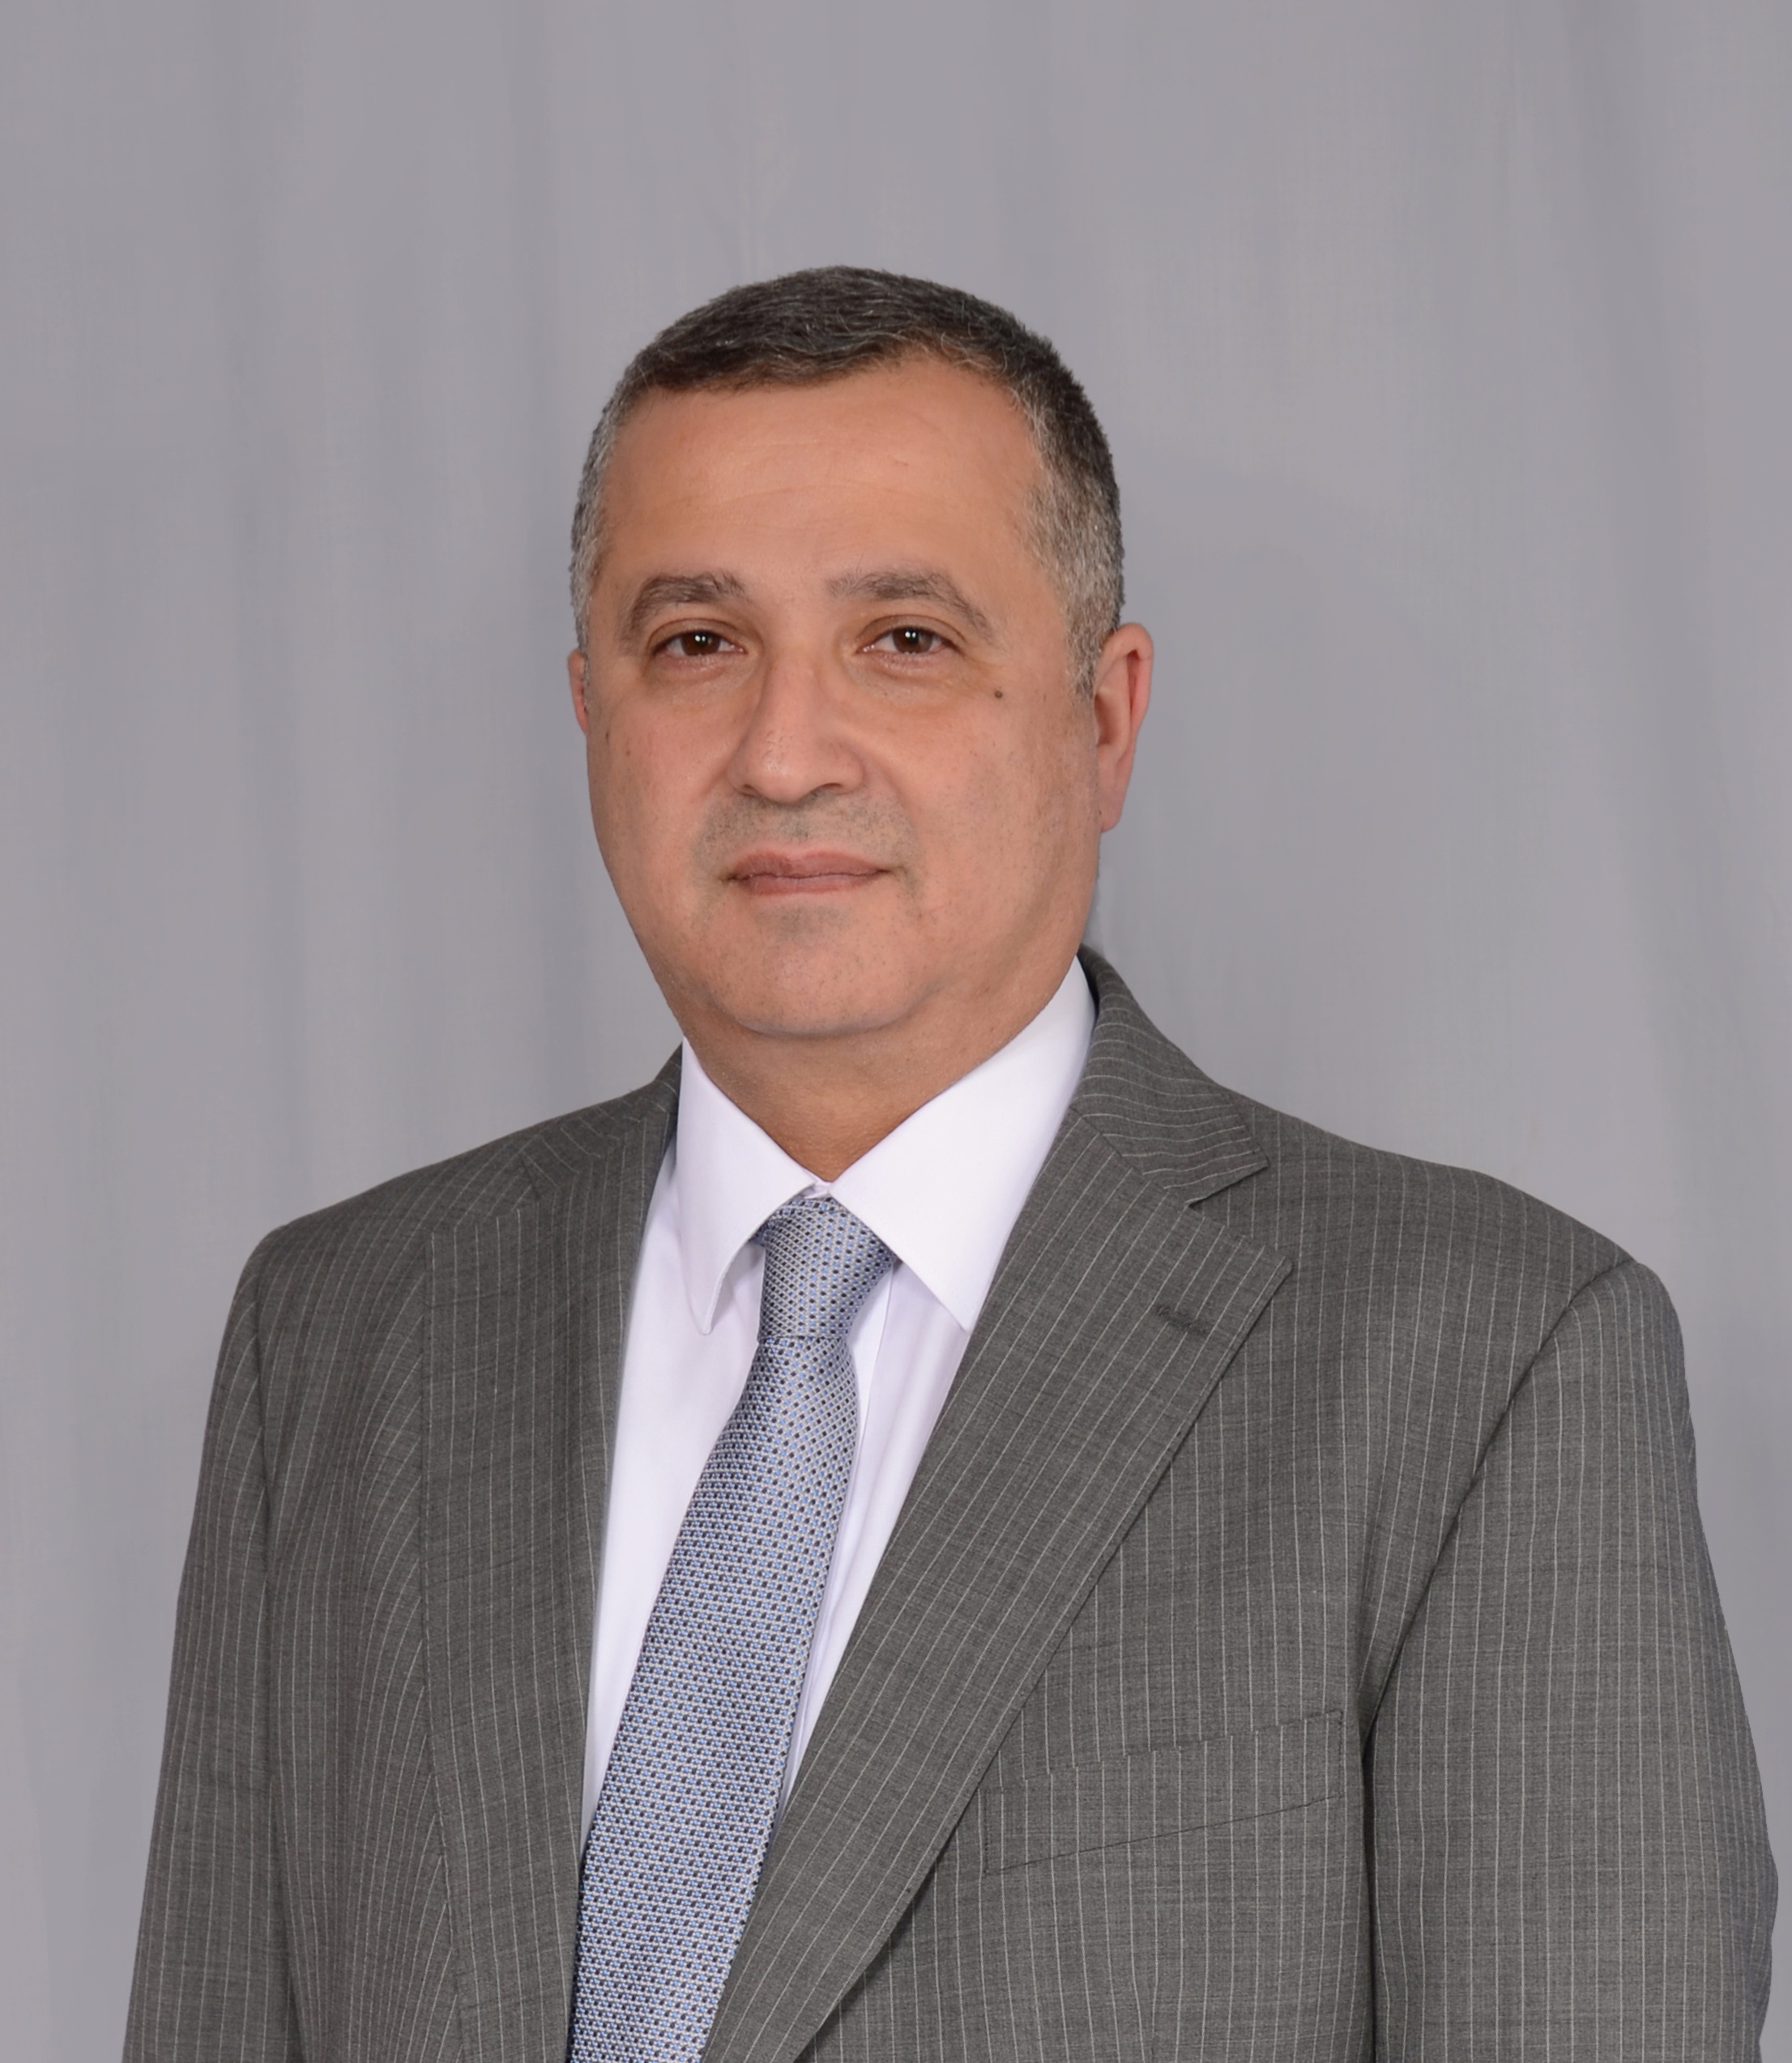 R&M appoints Nabil Khalil as Executive Vice-President for region